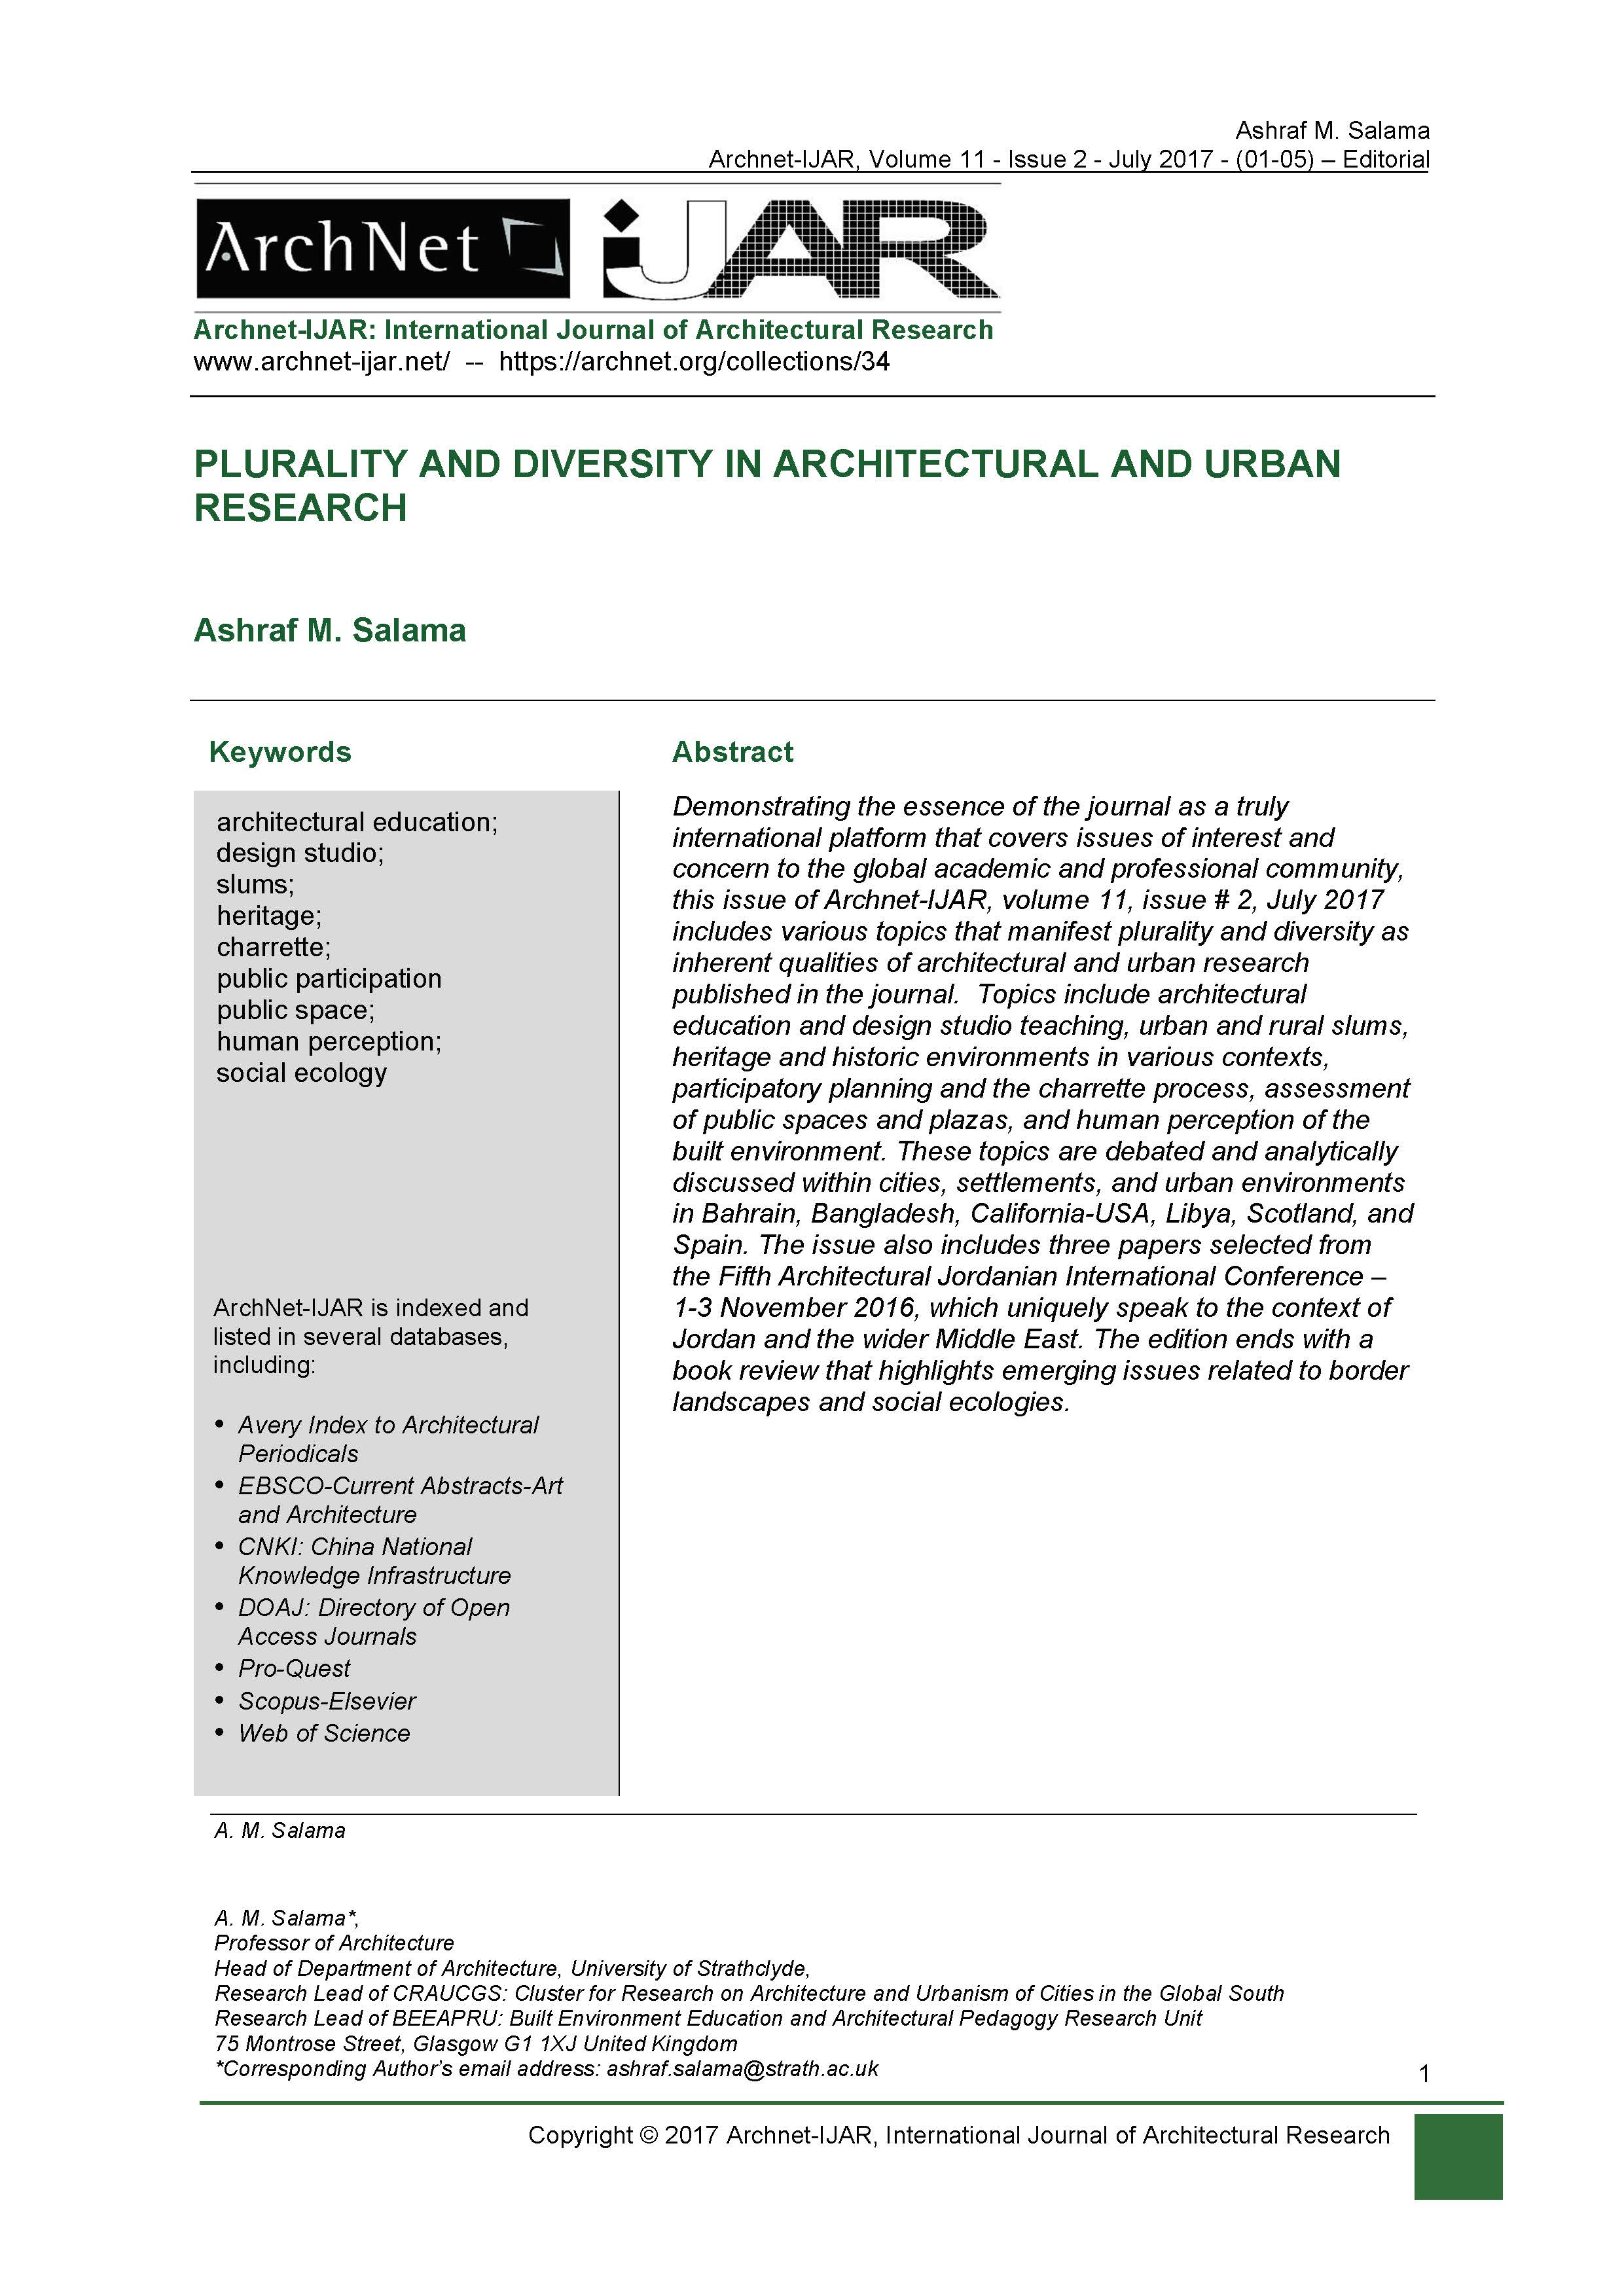 Plurality and Diversity in Architectural and Urban Research